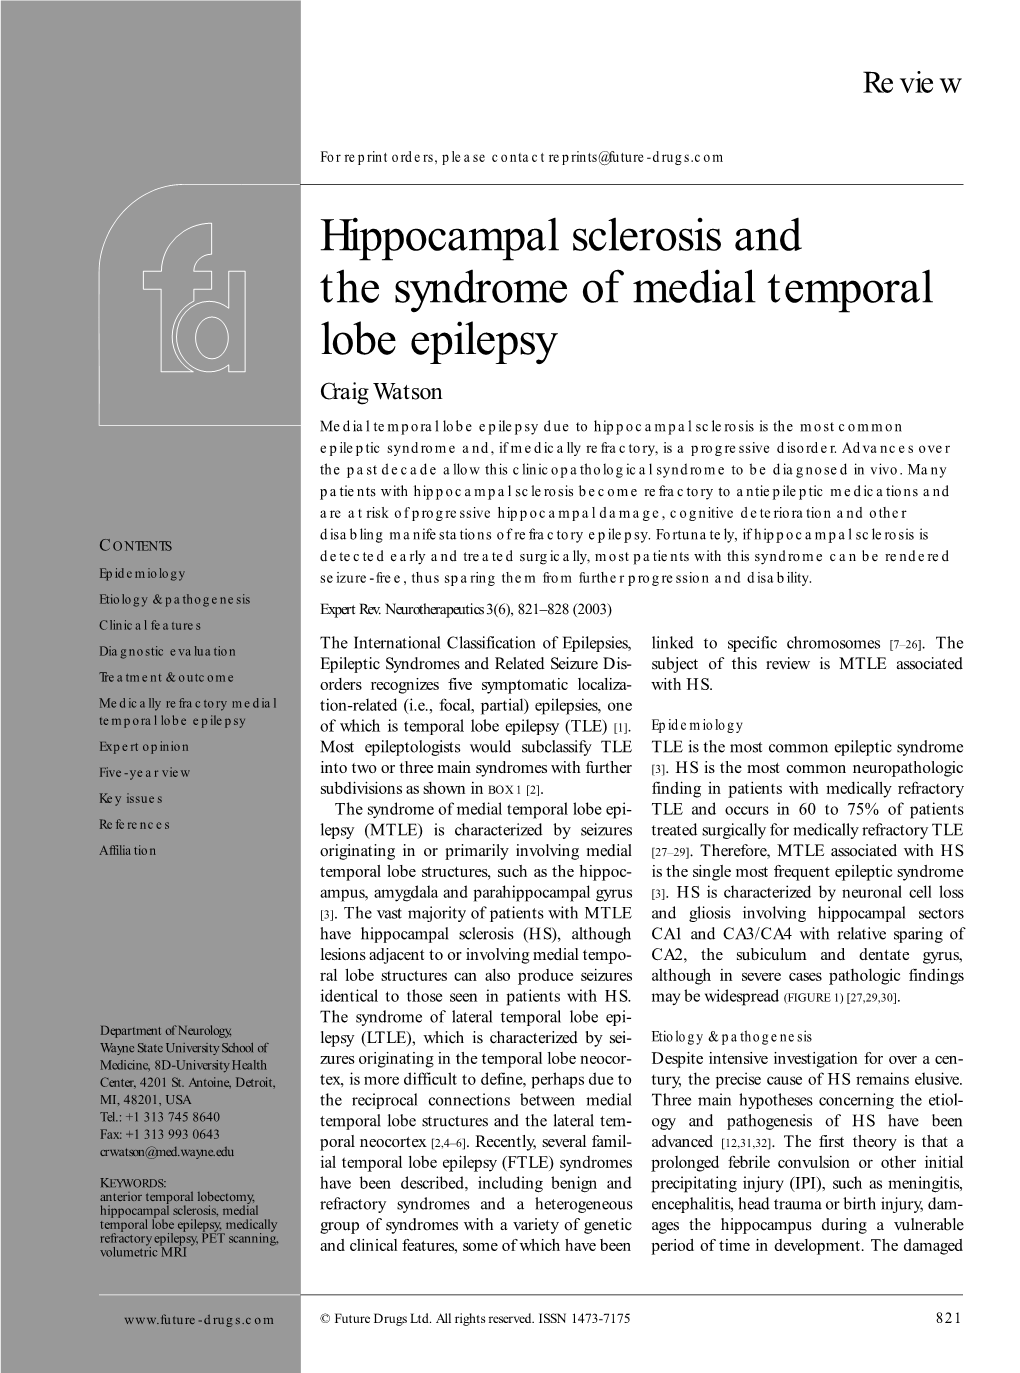 Hippocampal Sclerosis and the Syndrome of Medial Temporal Lobe